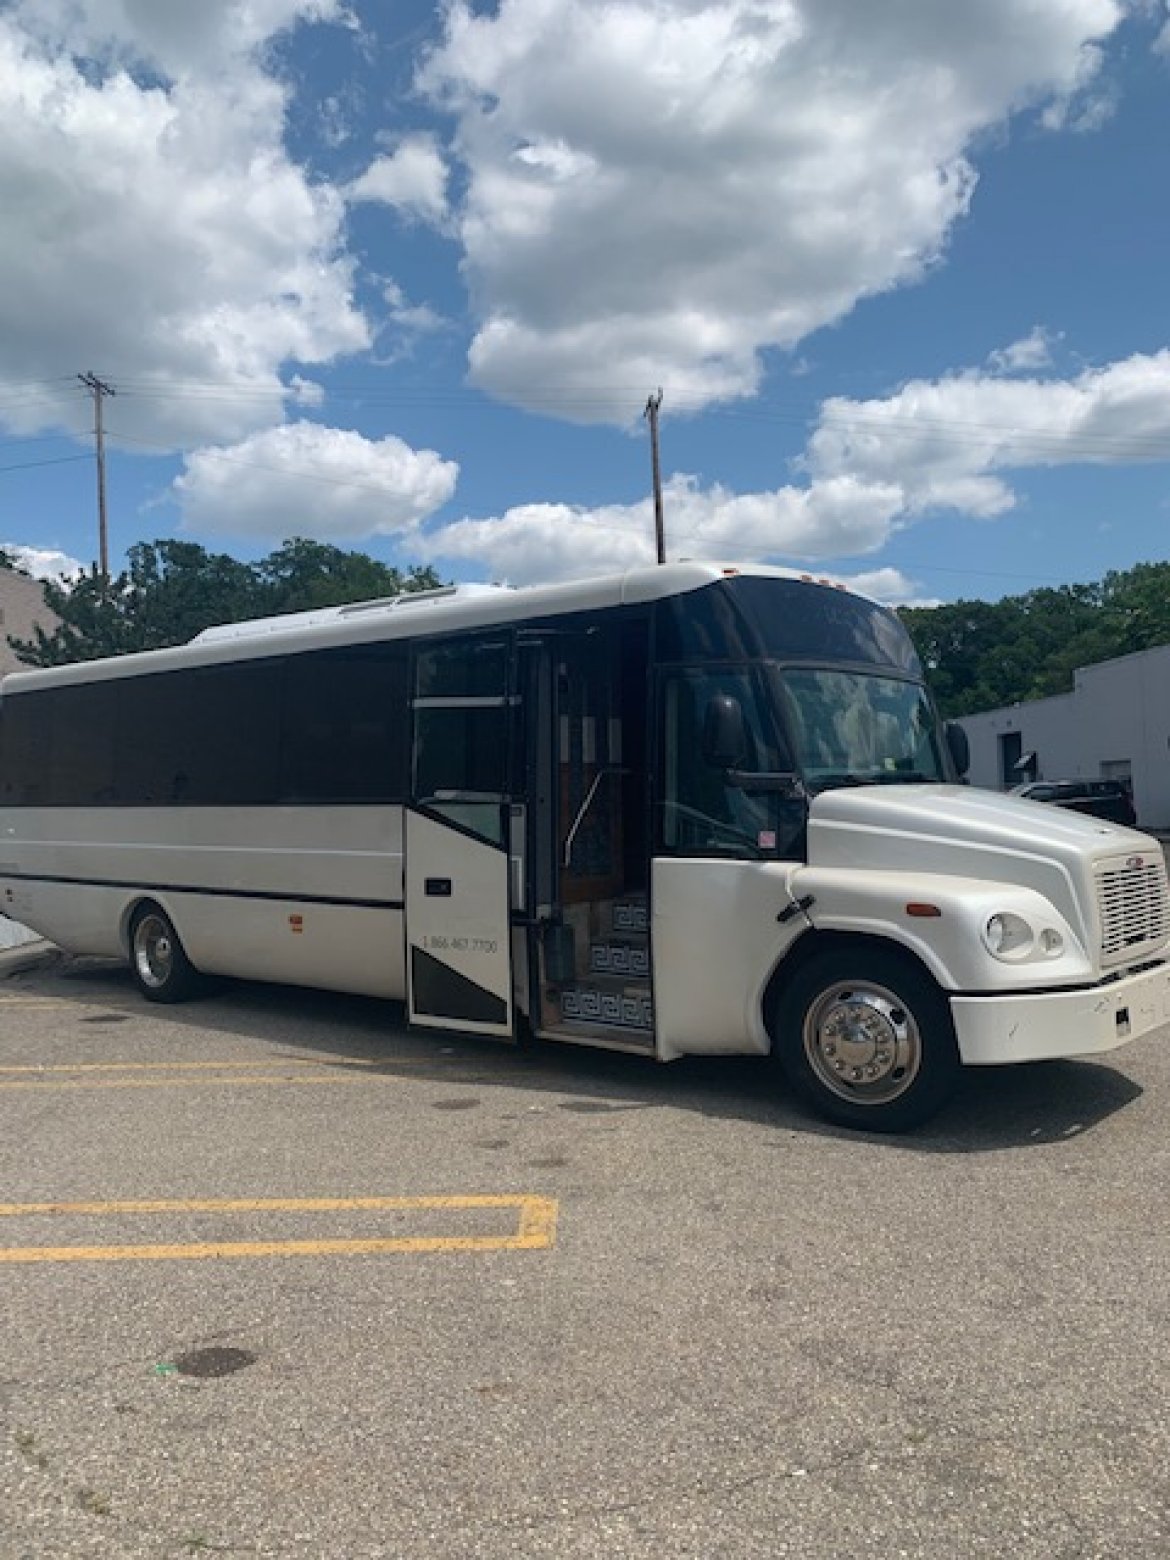 Limo Bus for sale: 2005 Freightliner m1035 by m1035